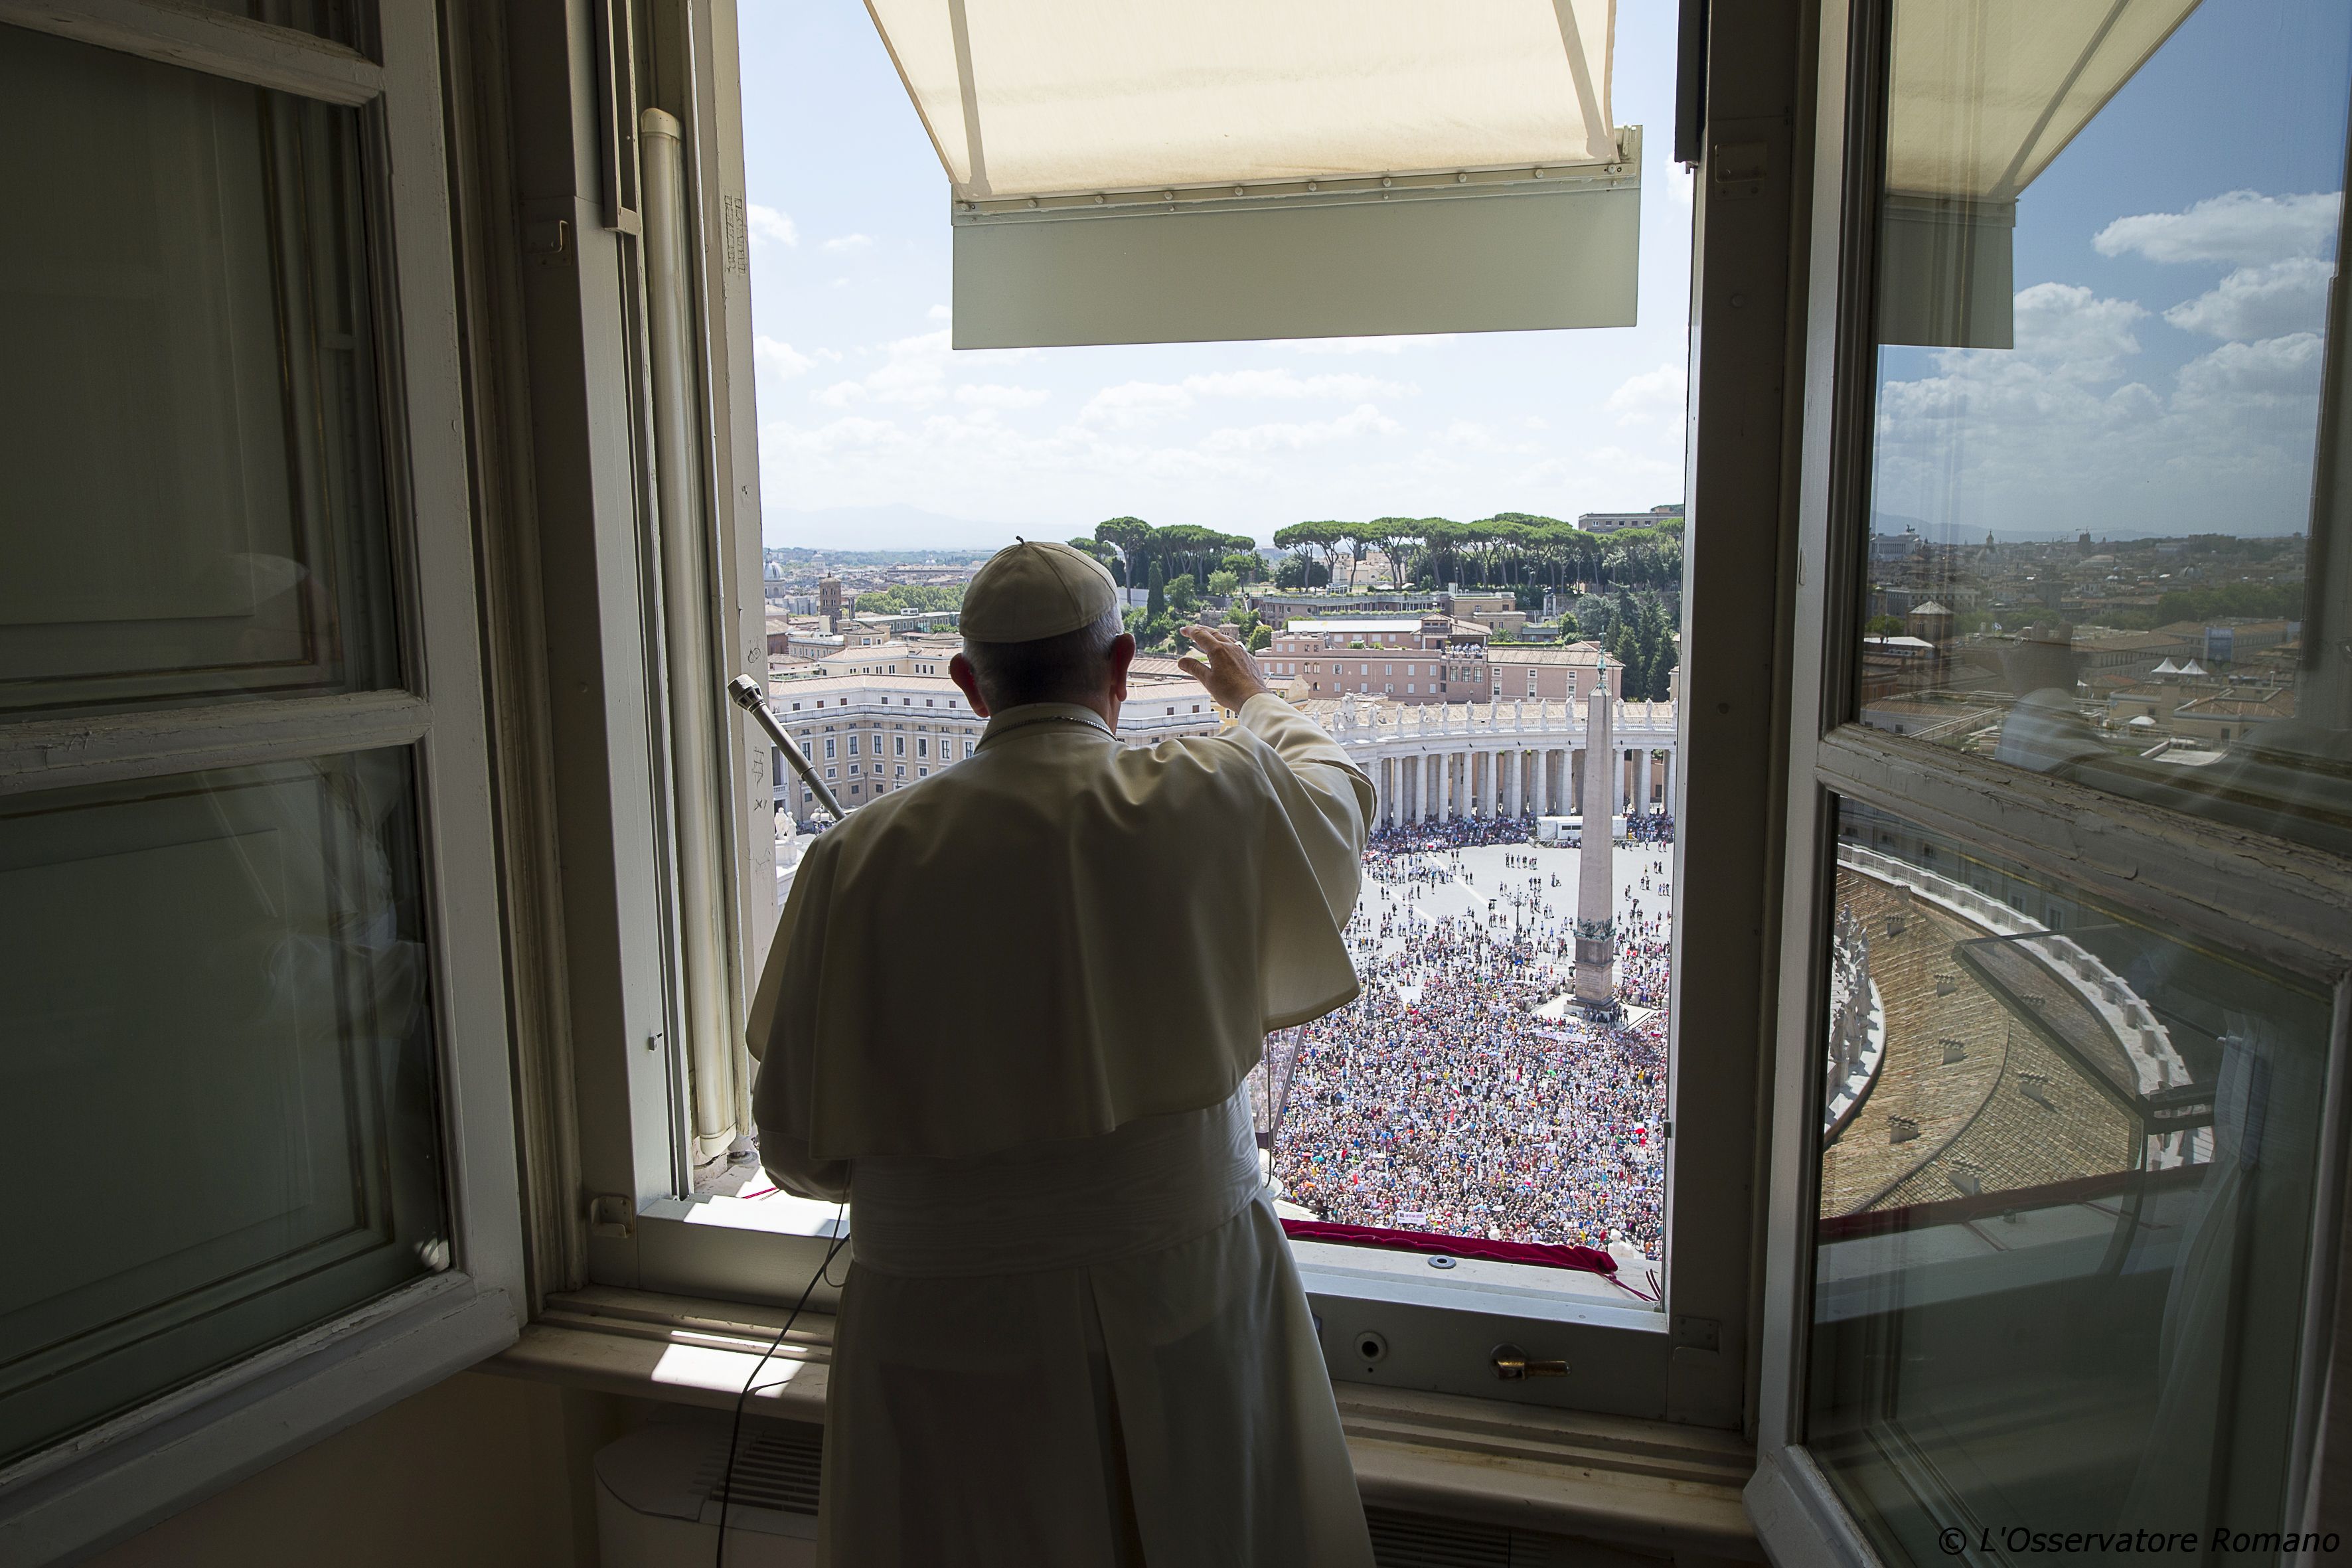 Pope Francis greets the faithful during the Angelus of Sunday 26th of July 2015